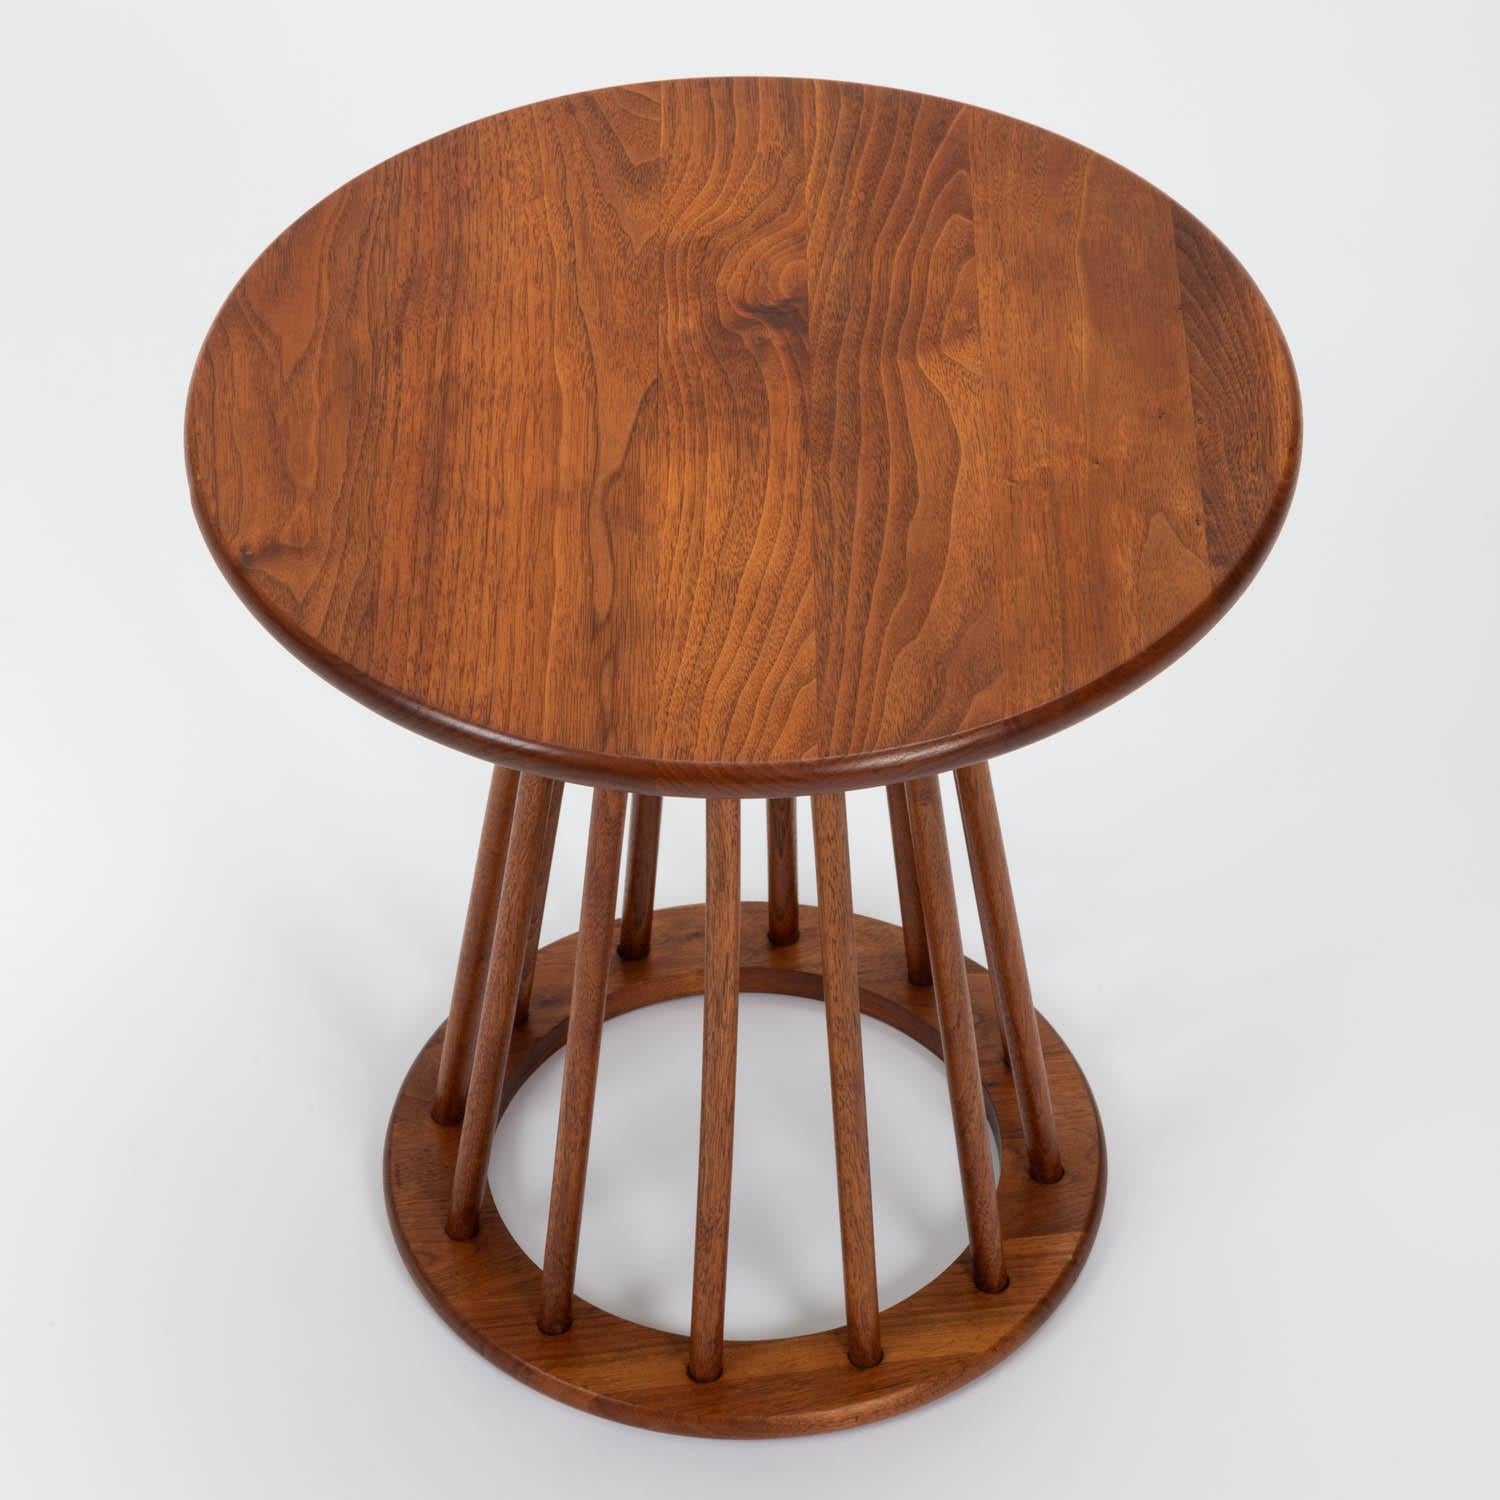 Oiled Pair of Round Walnut Side Tables by Arthur Umanoff for Washington Woodcraft